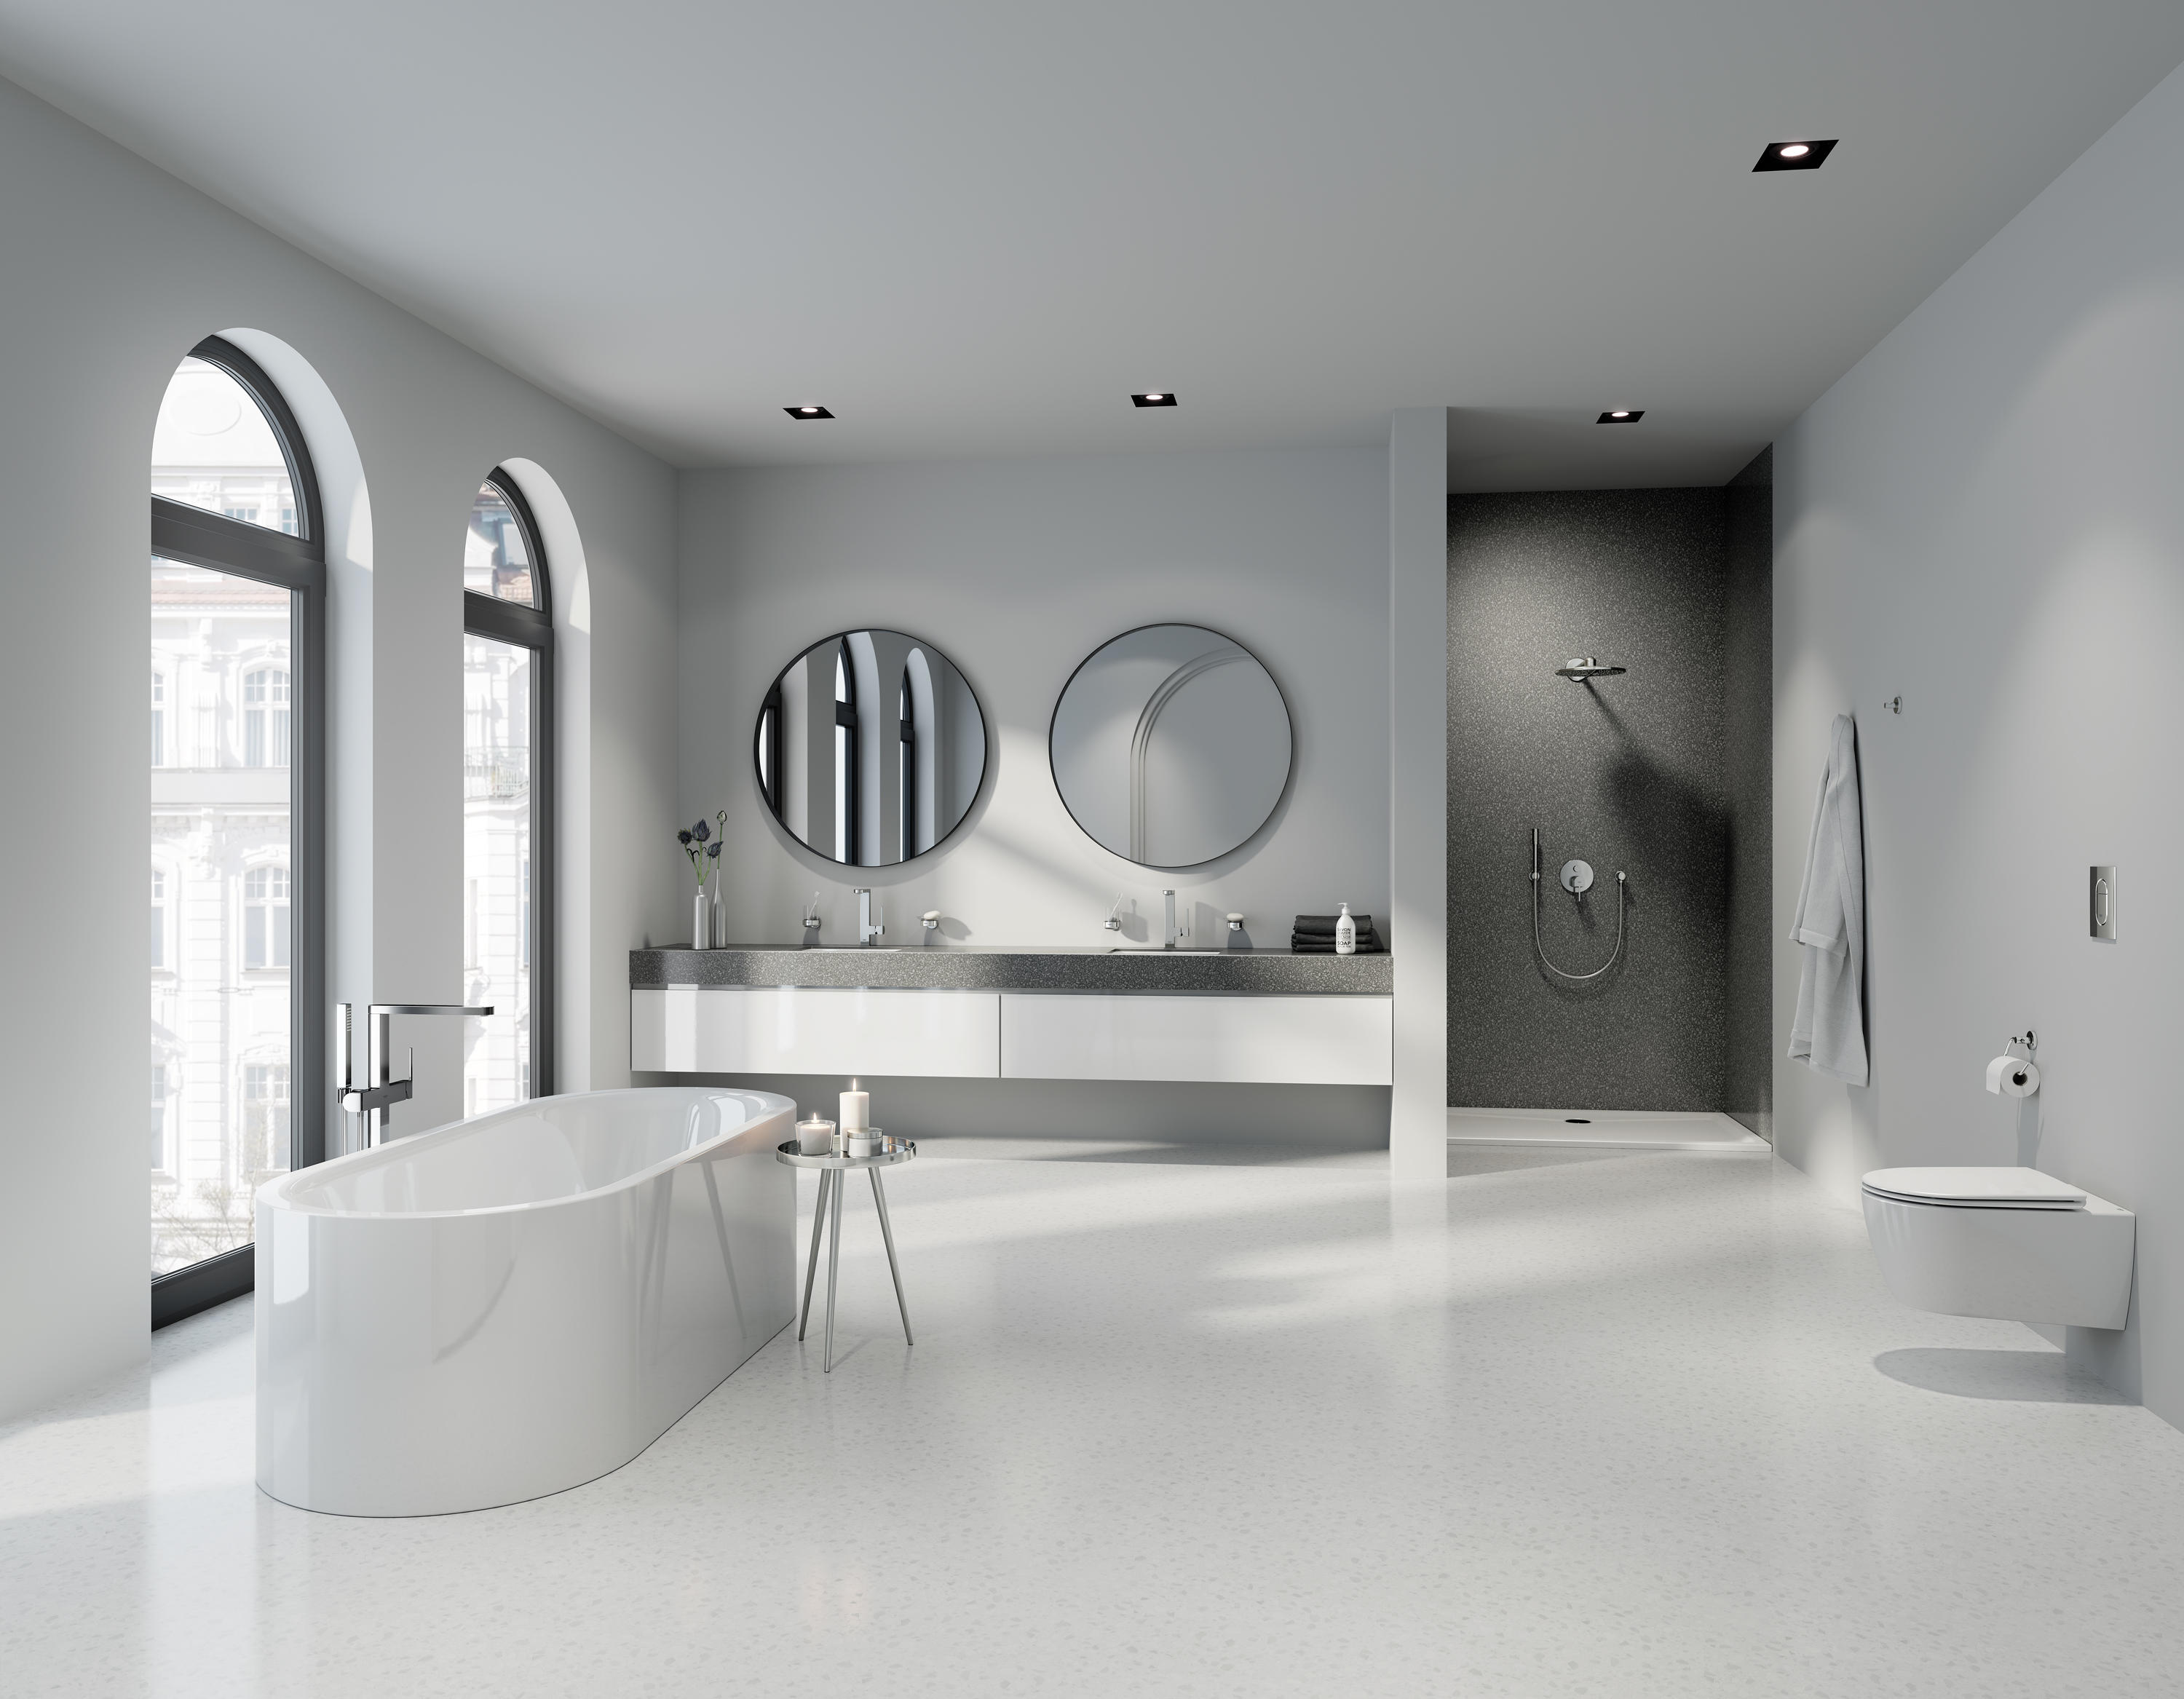 GROHE is back with the latest edition of its Bath and Design Awards